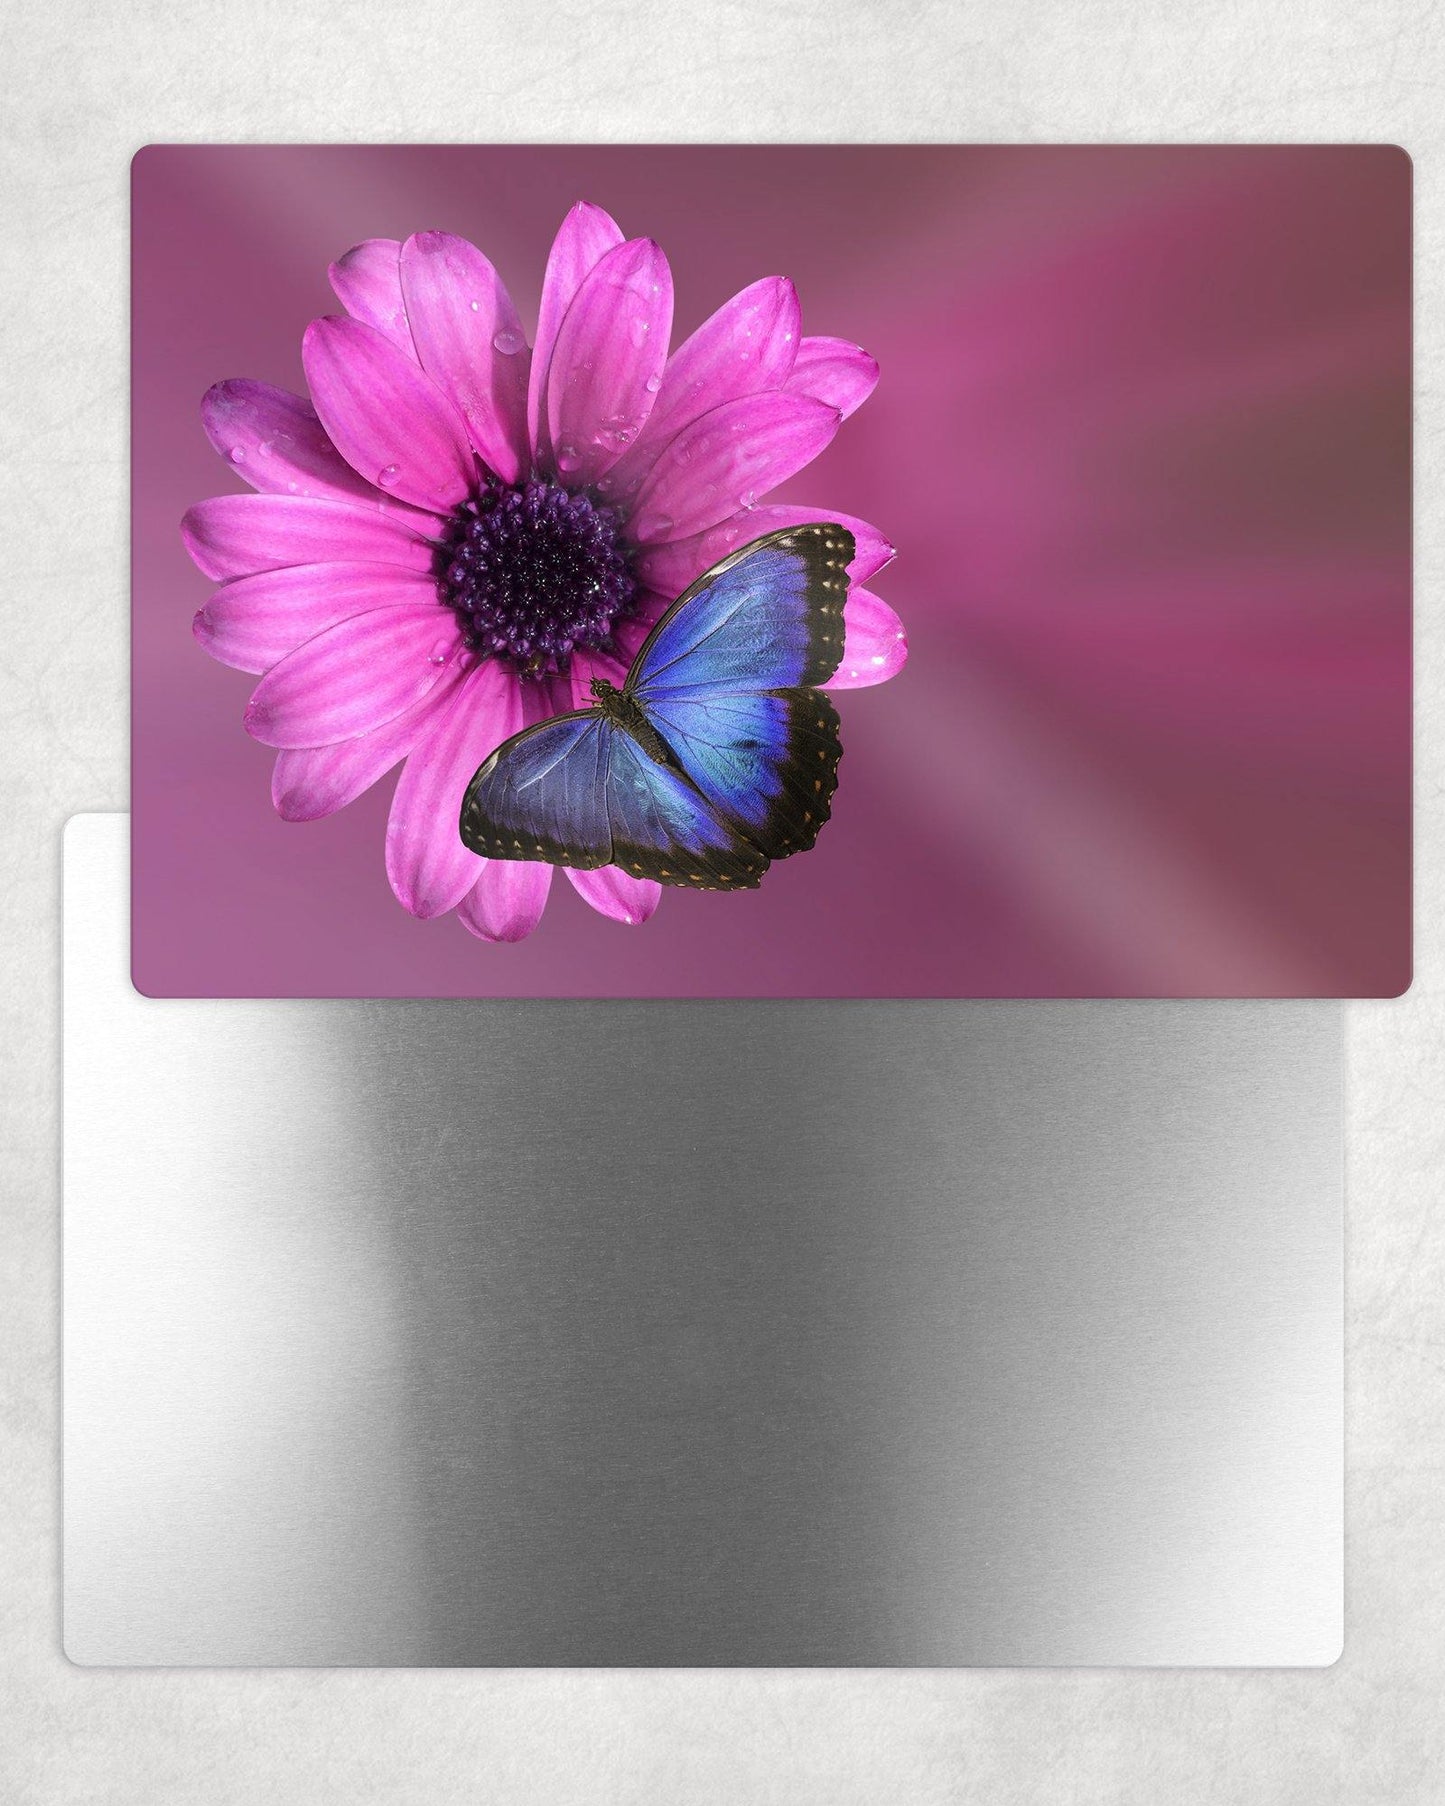 Blue Butterfly on Pink Flower Metal Photo Panel - 8x12 or 12x18 - Schoppix Gifts